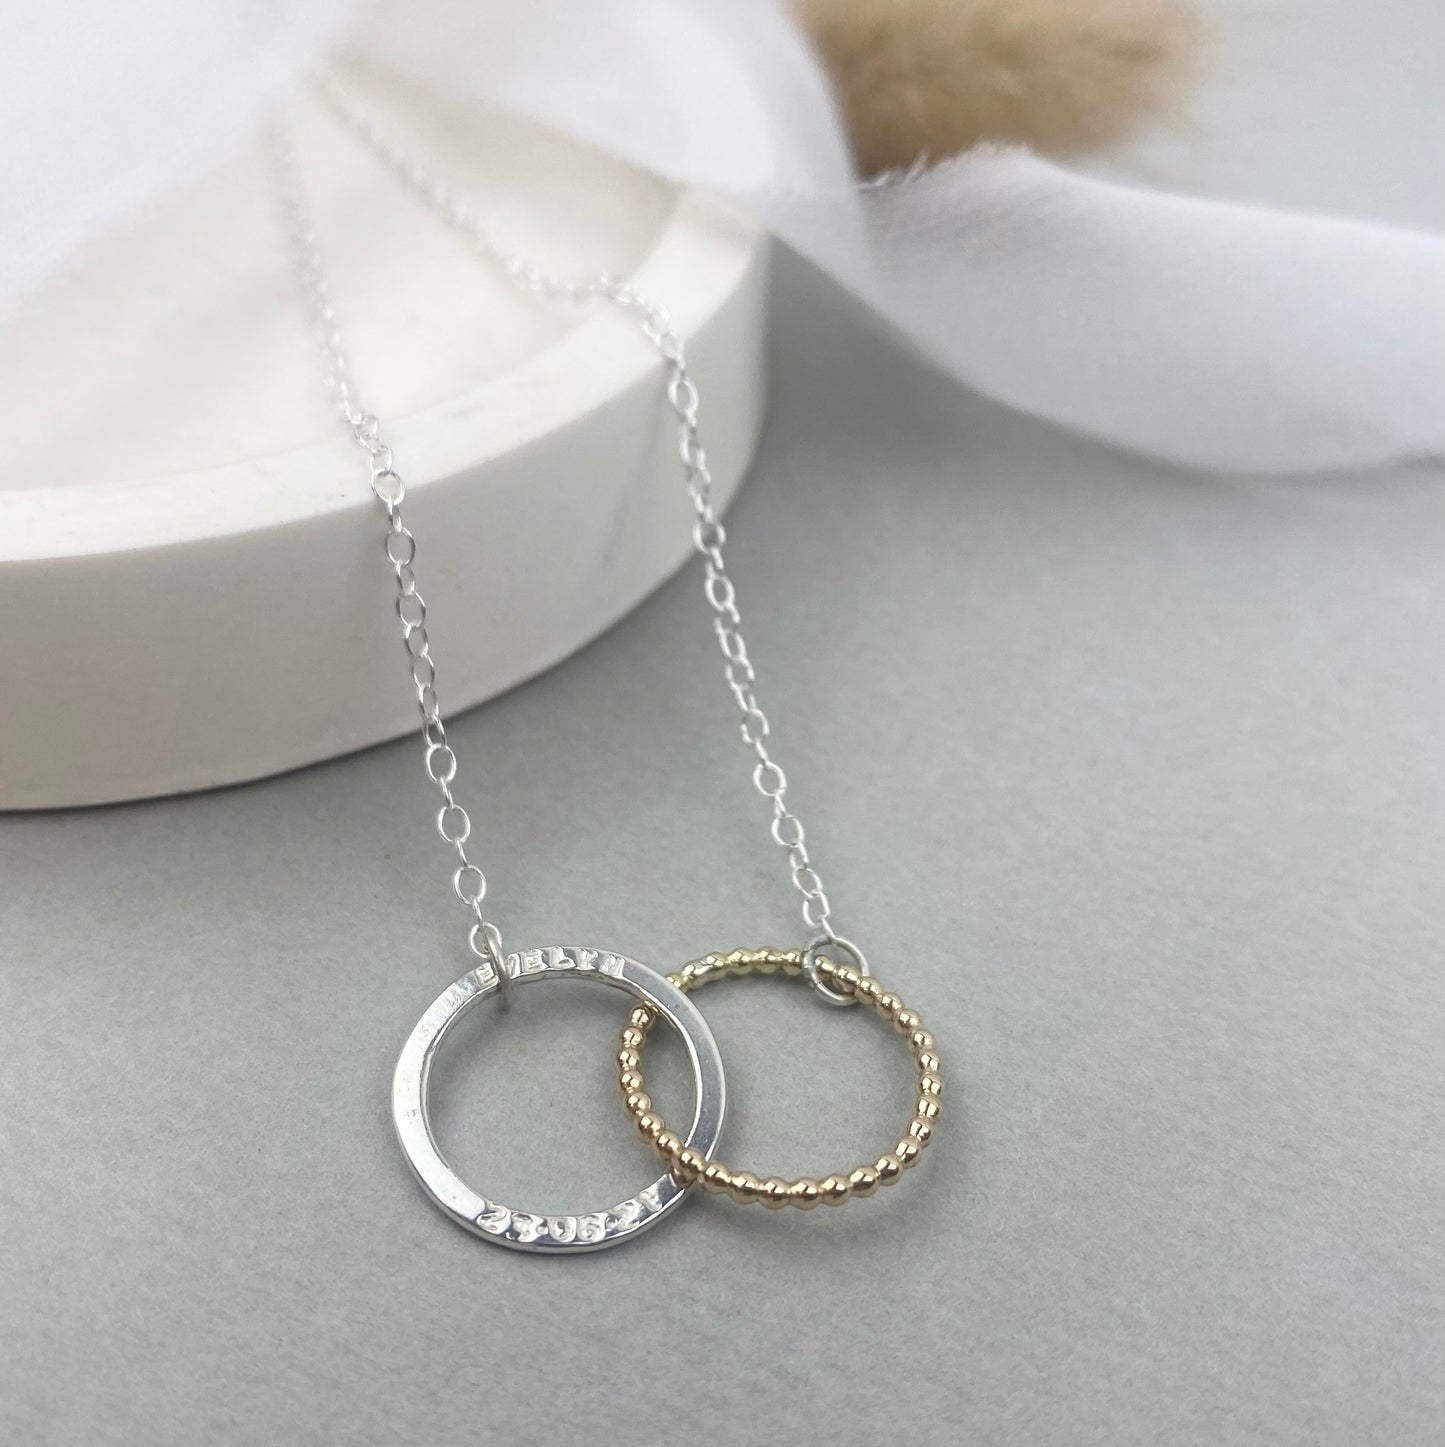 The Halo Laurel Beaded Personalised Necklace - personalised interlinking hoops - hand stamped monogram and name necklace gift